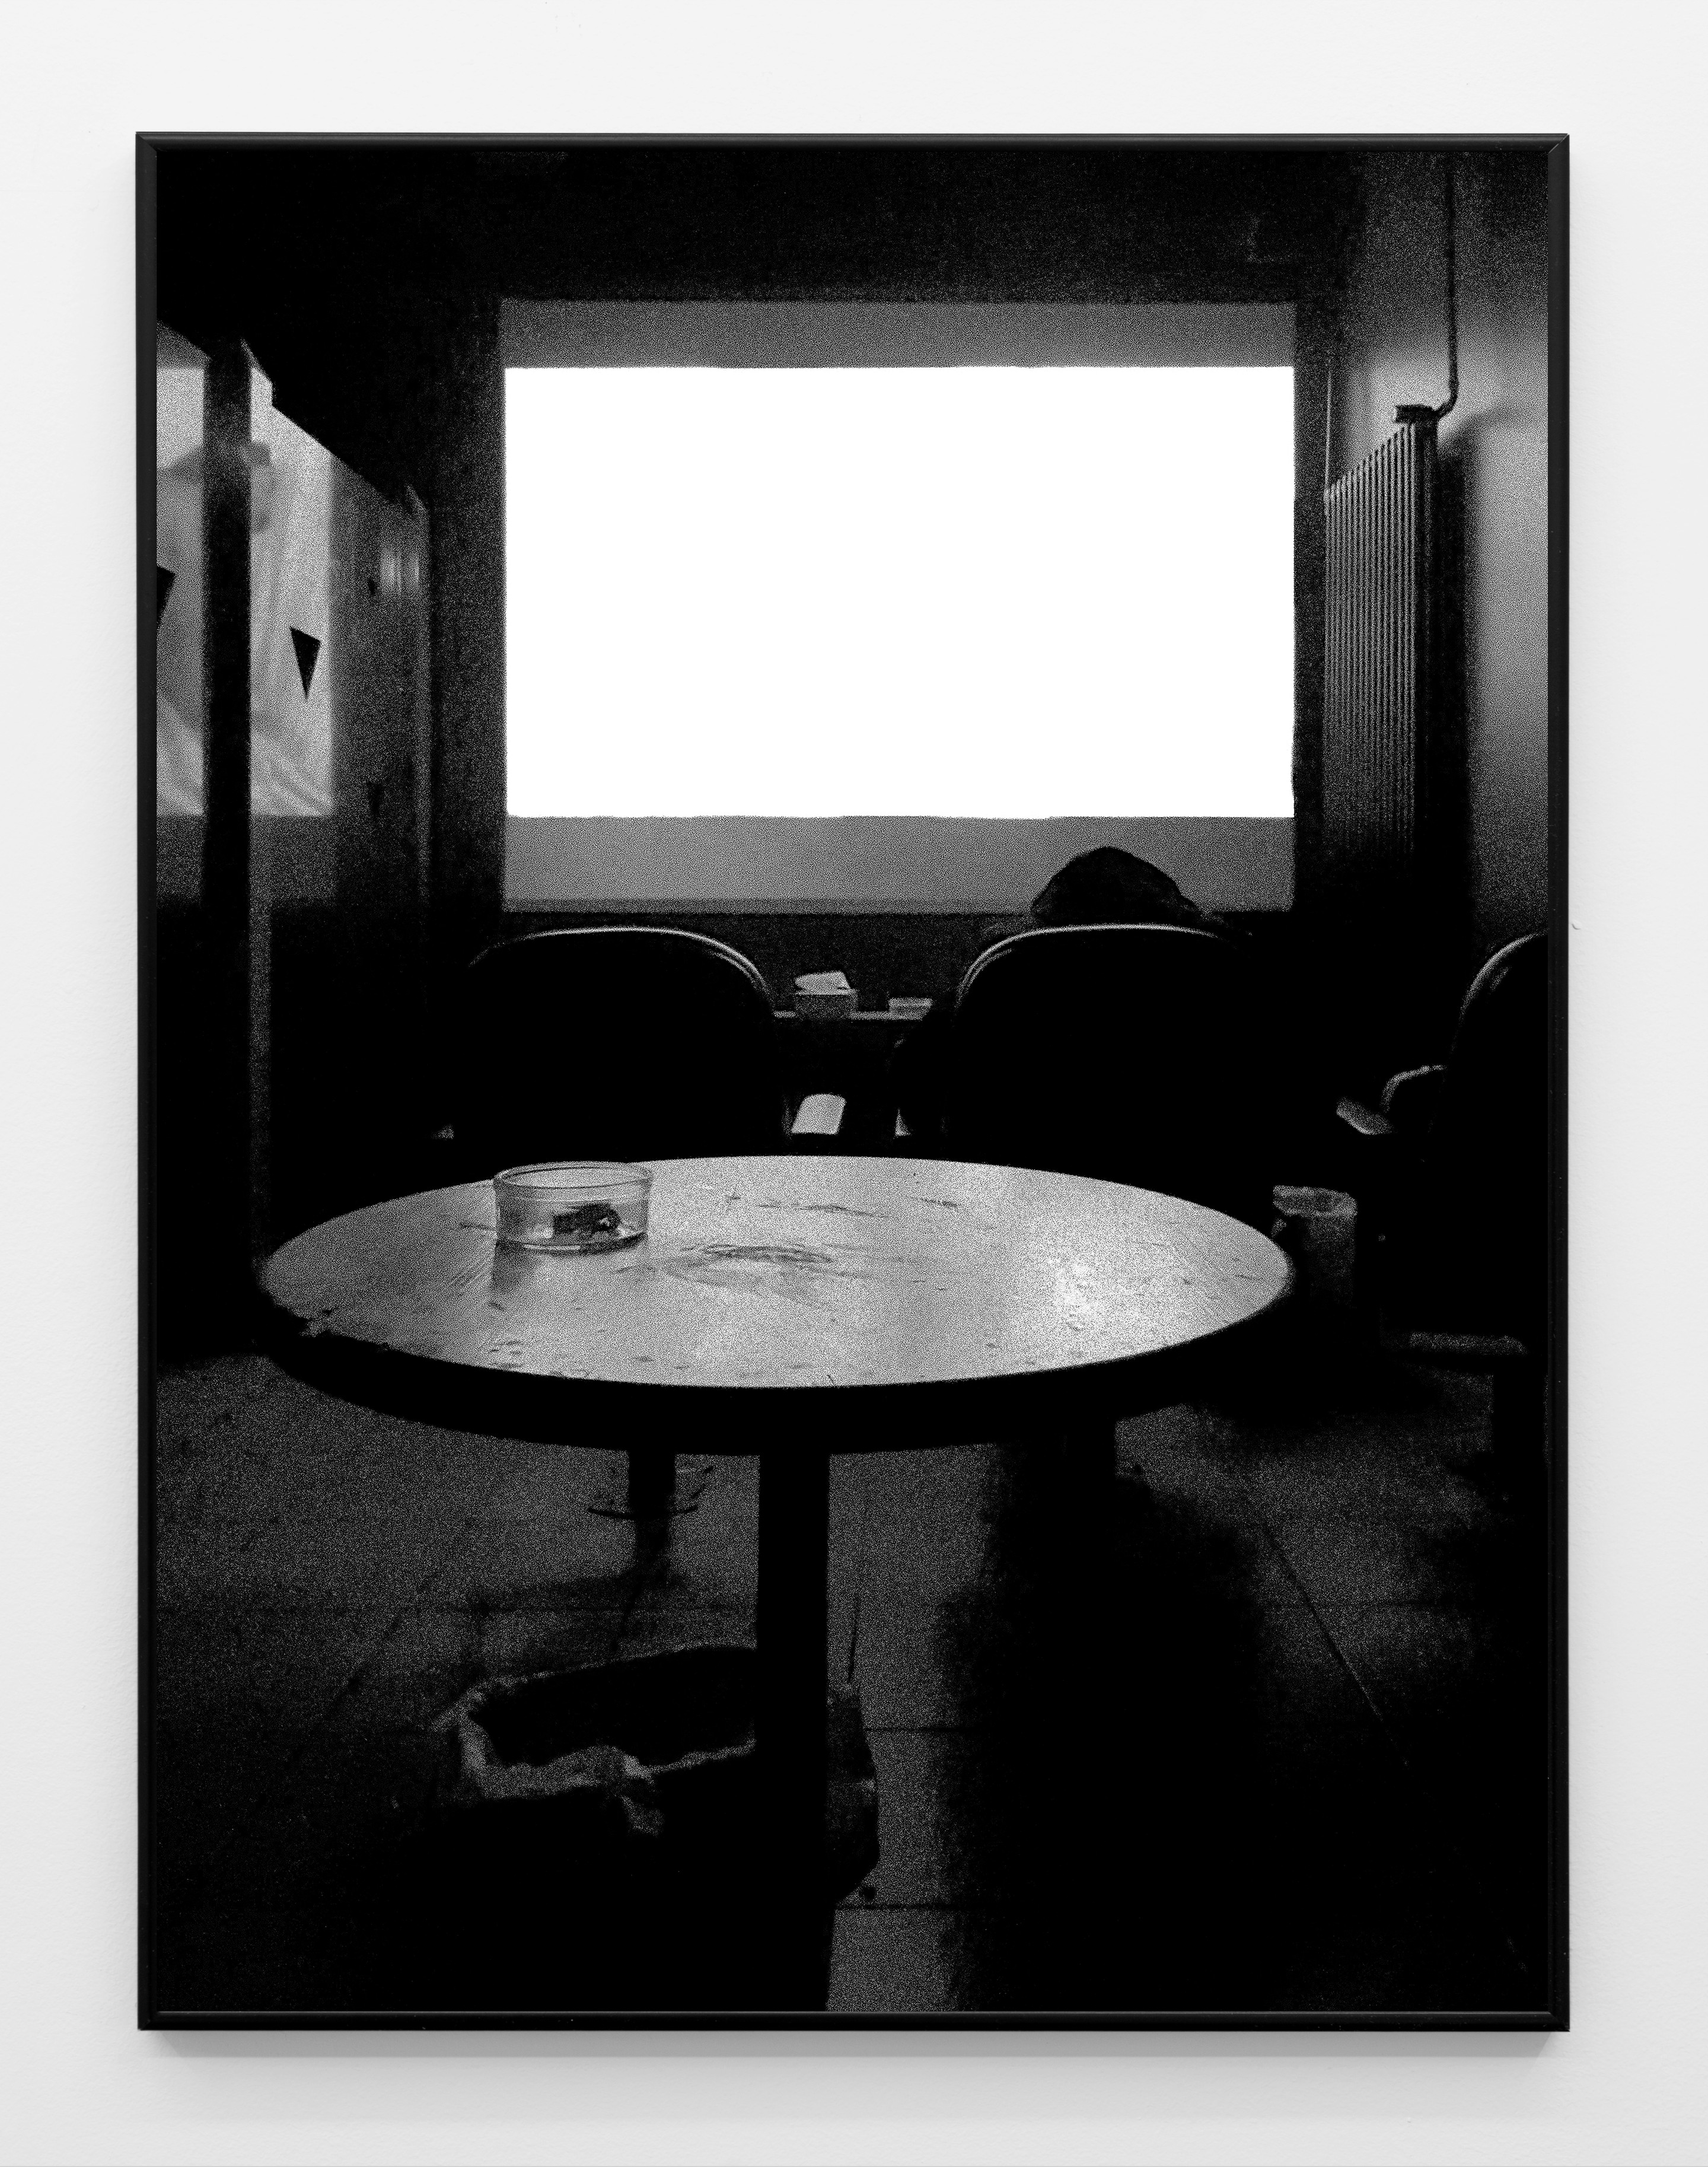 Being Alone (2022)

Archival inkjet print

23.4h x 16.5w inches (59.5h x 42w cm)